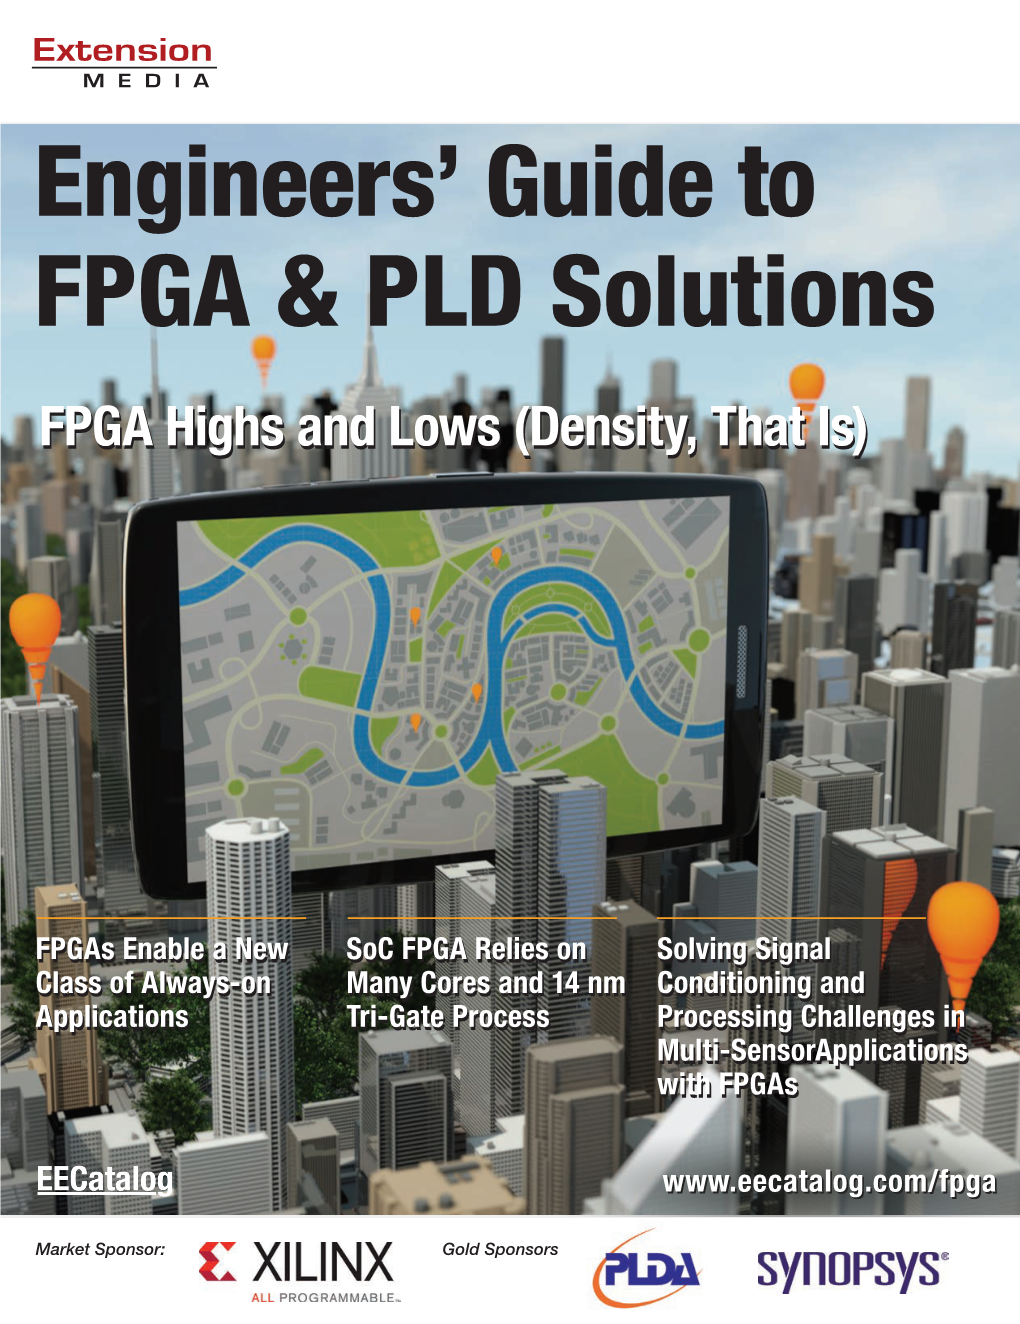 Engineers' Guide to FPGA & PLD Solutions